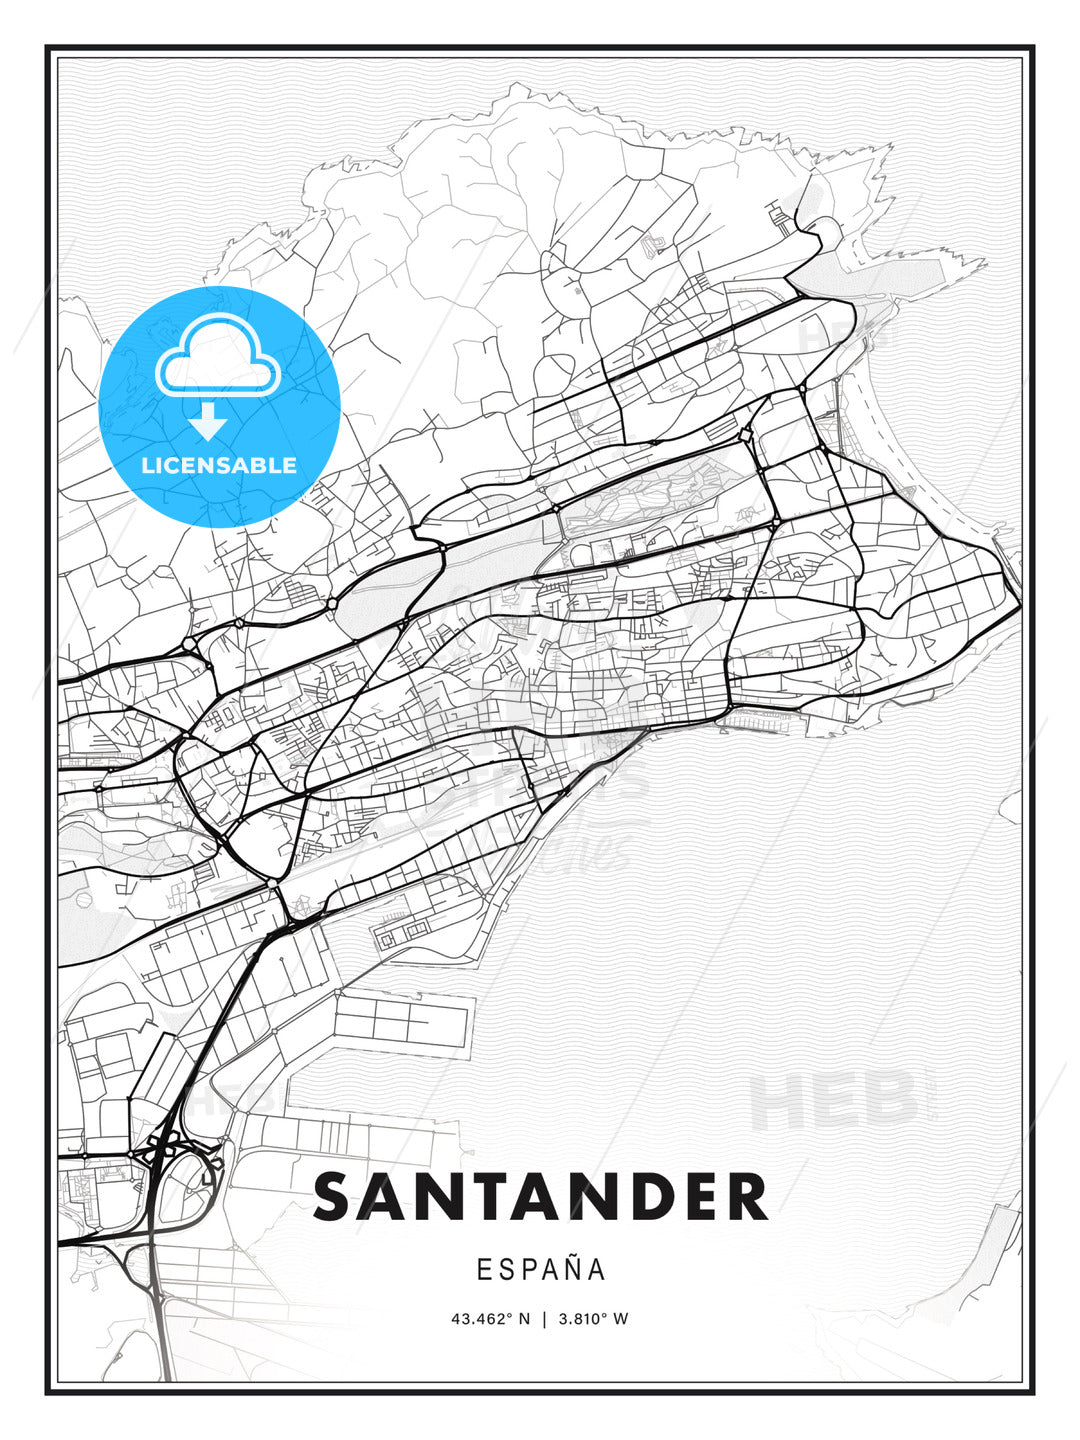 Santander, Spain, Modern Print Template in Various Formats - HEBSTREITS Sketches